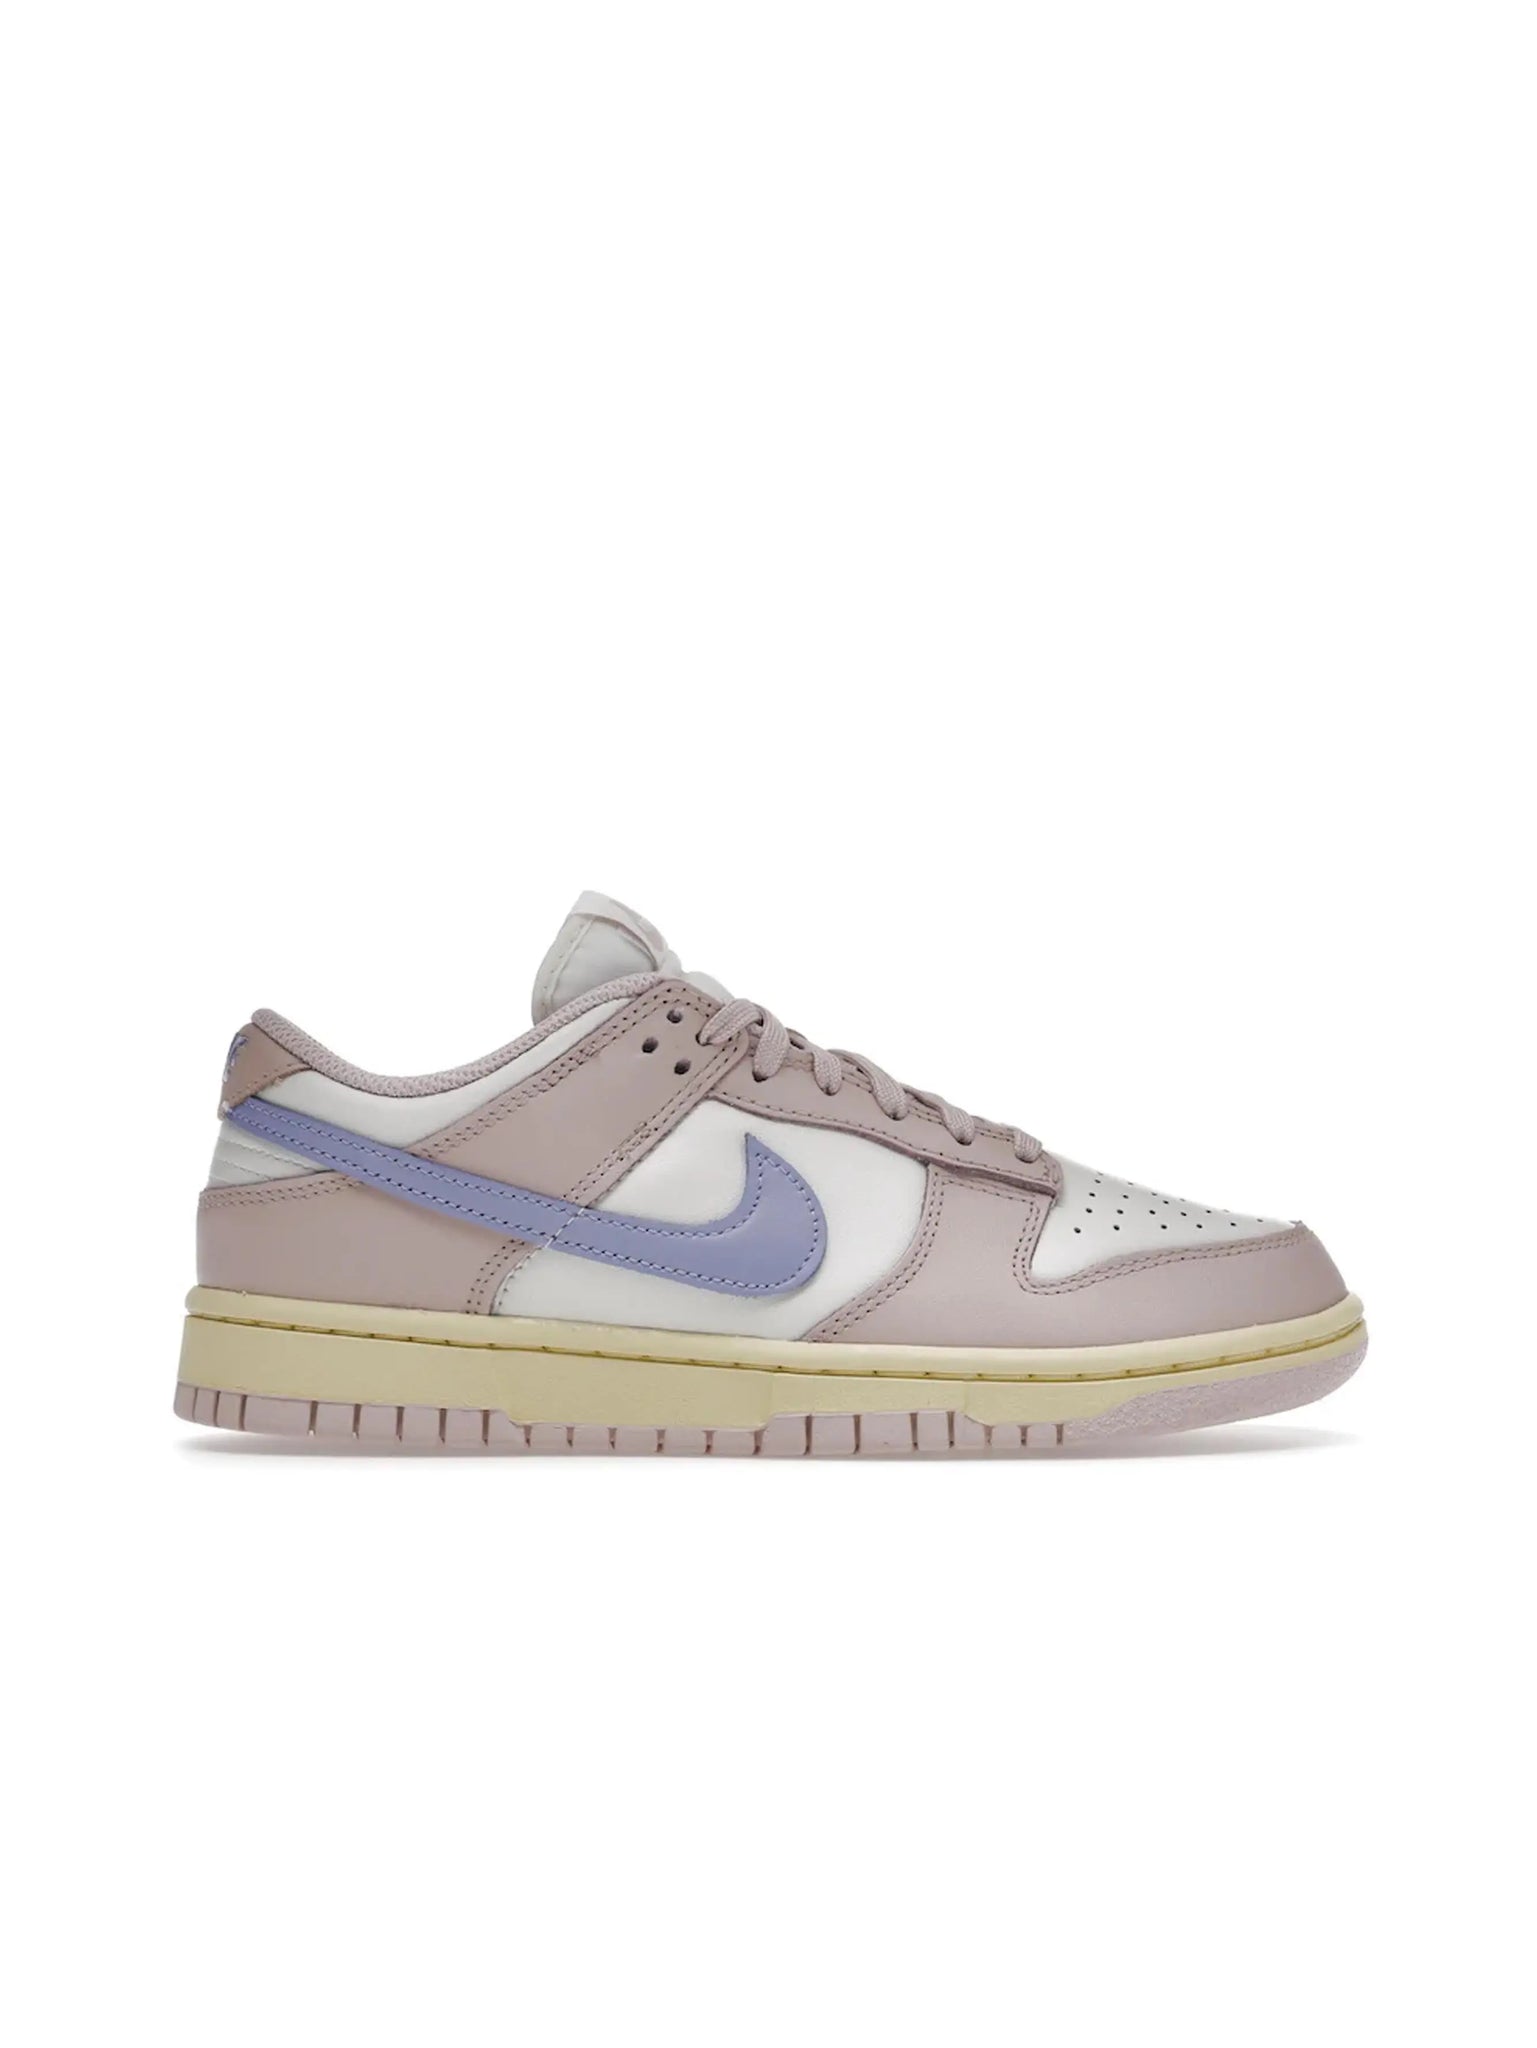 Nike Dunk Low Pink Oxford (W) in Auckland, New Zealand - Shop name